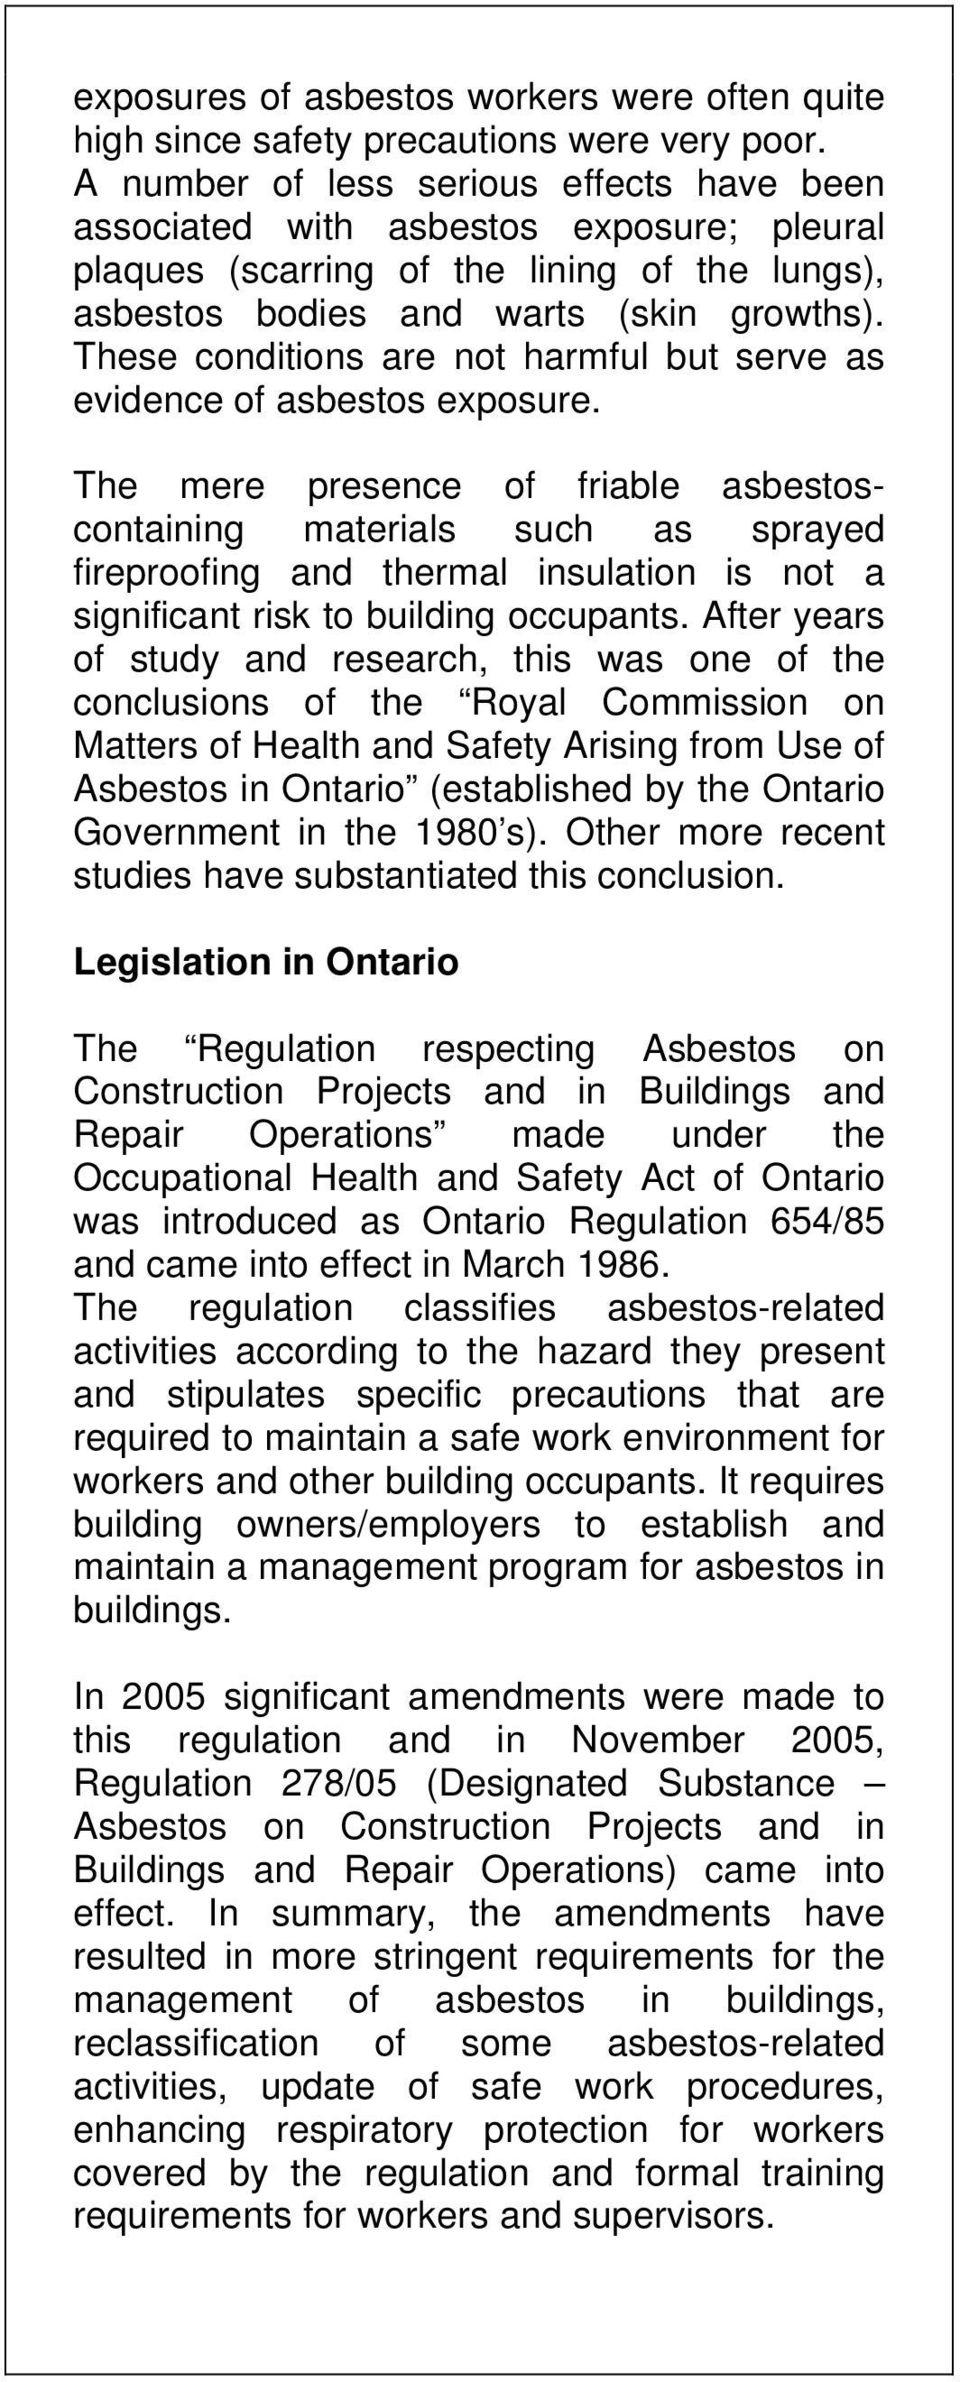 These conditions are not harmful but serve as evidence of asbestos exposure.